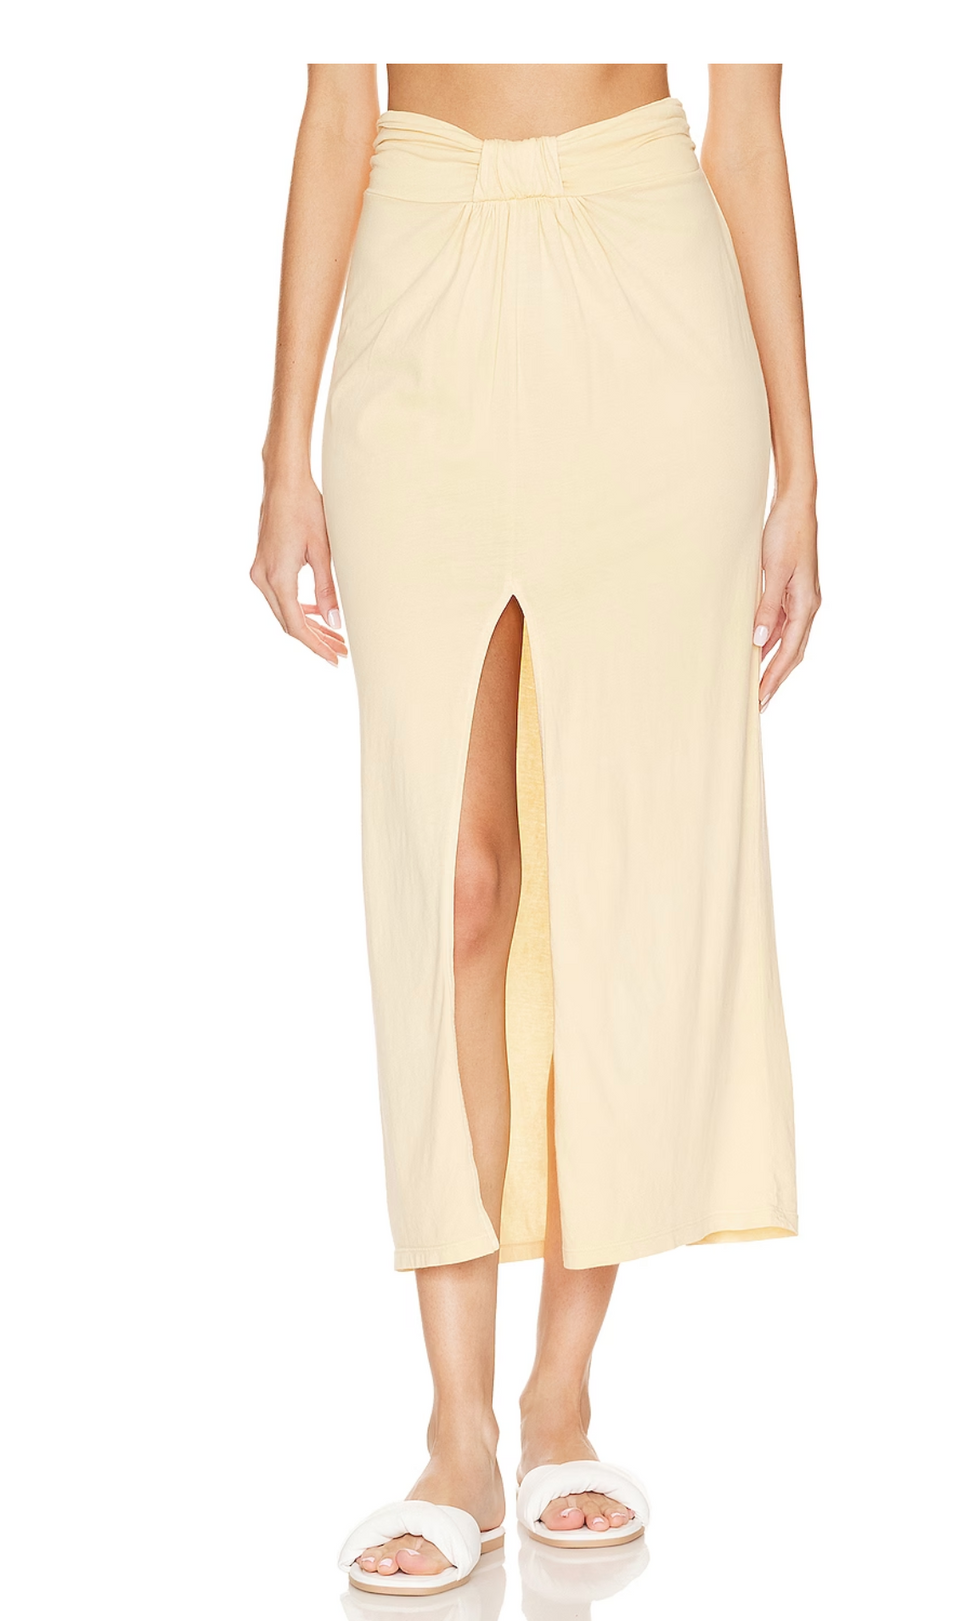 cotton midi skirt with front slit